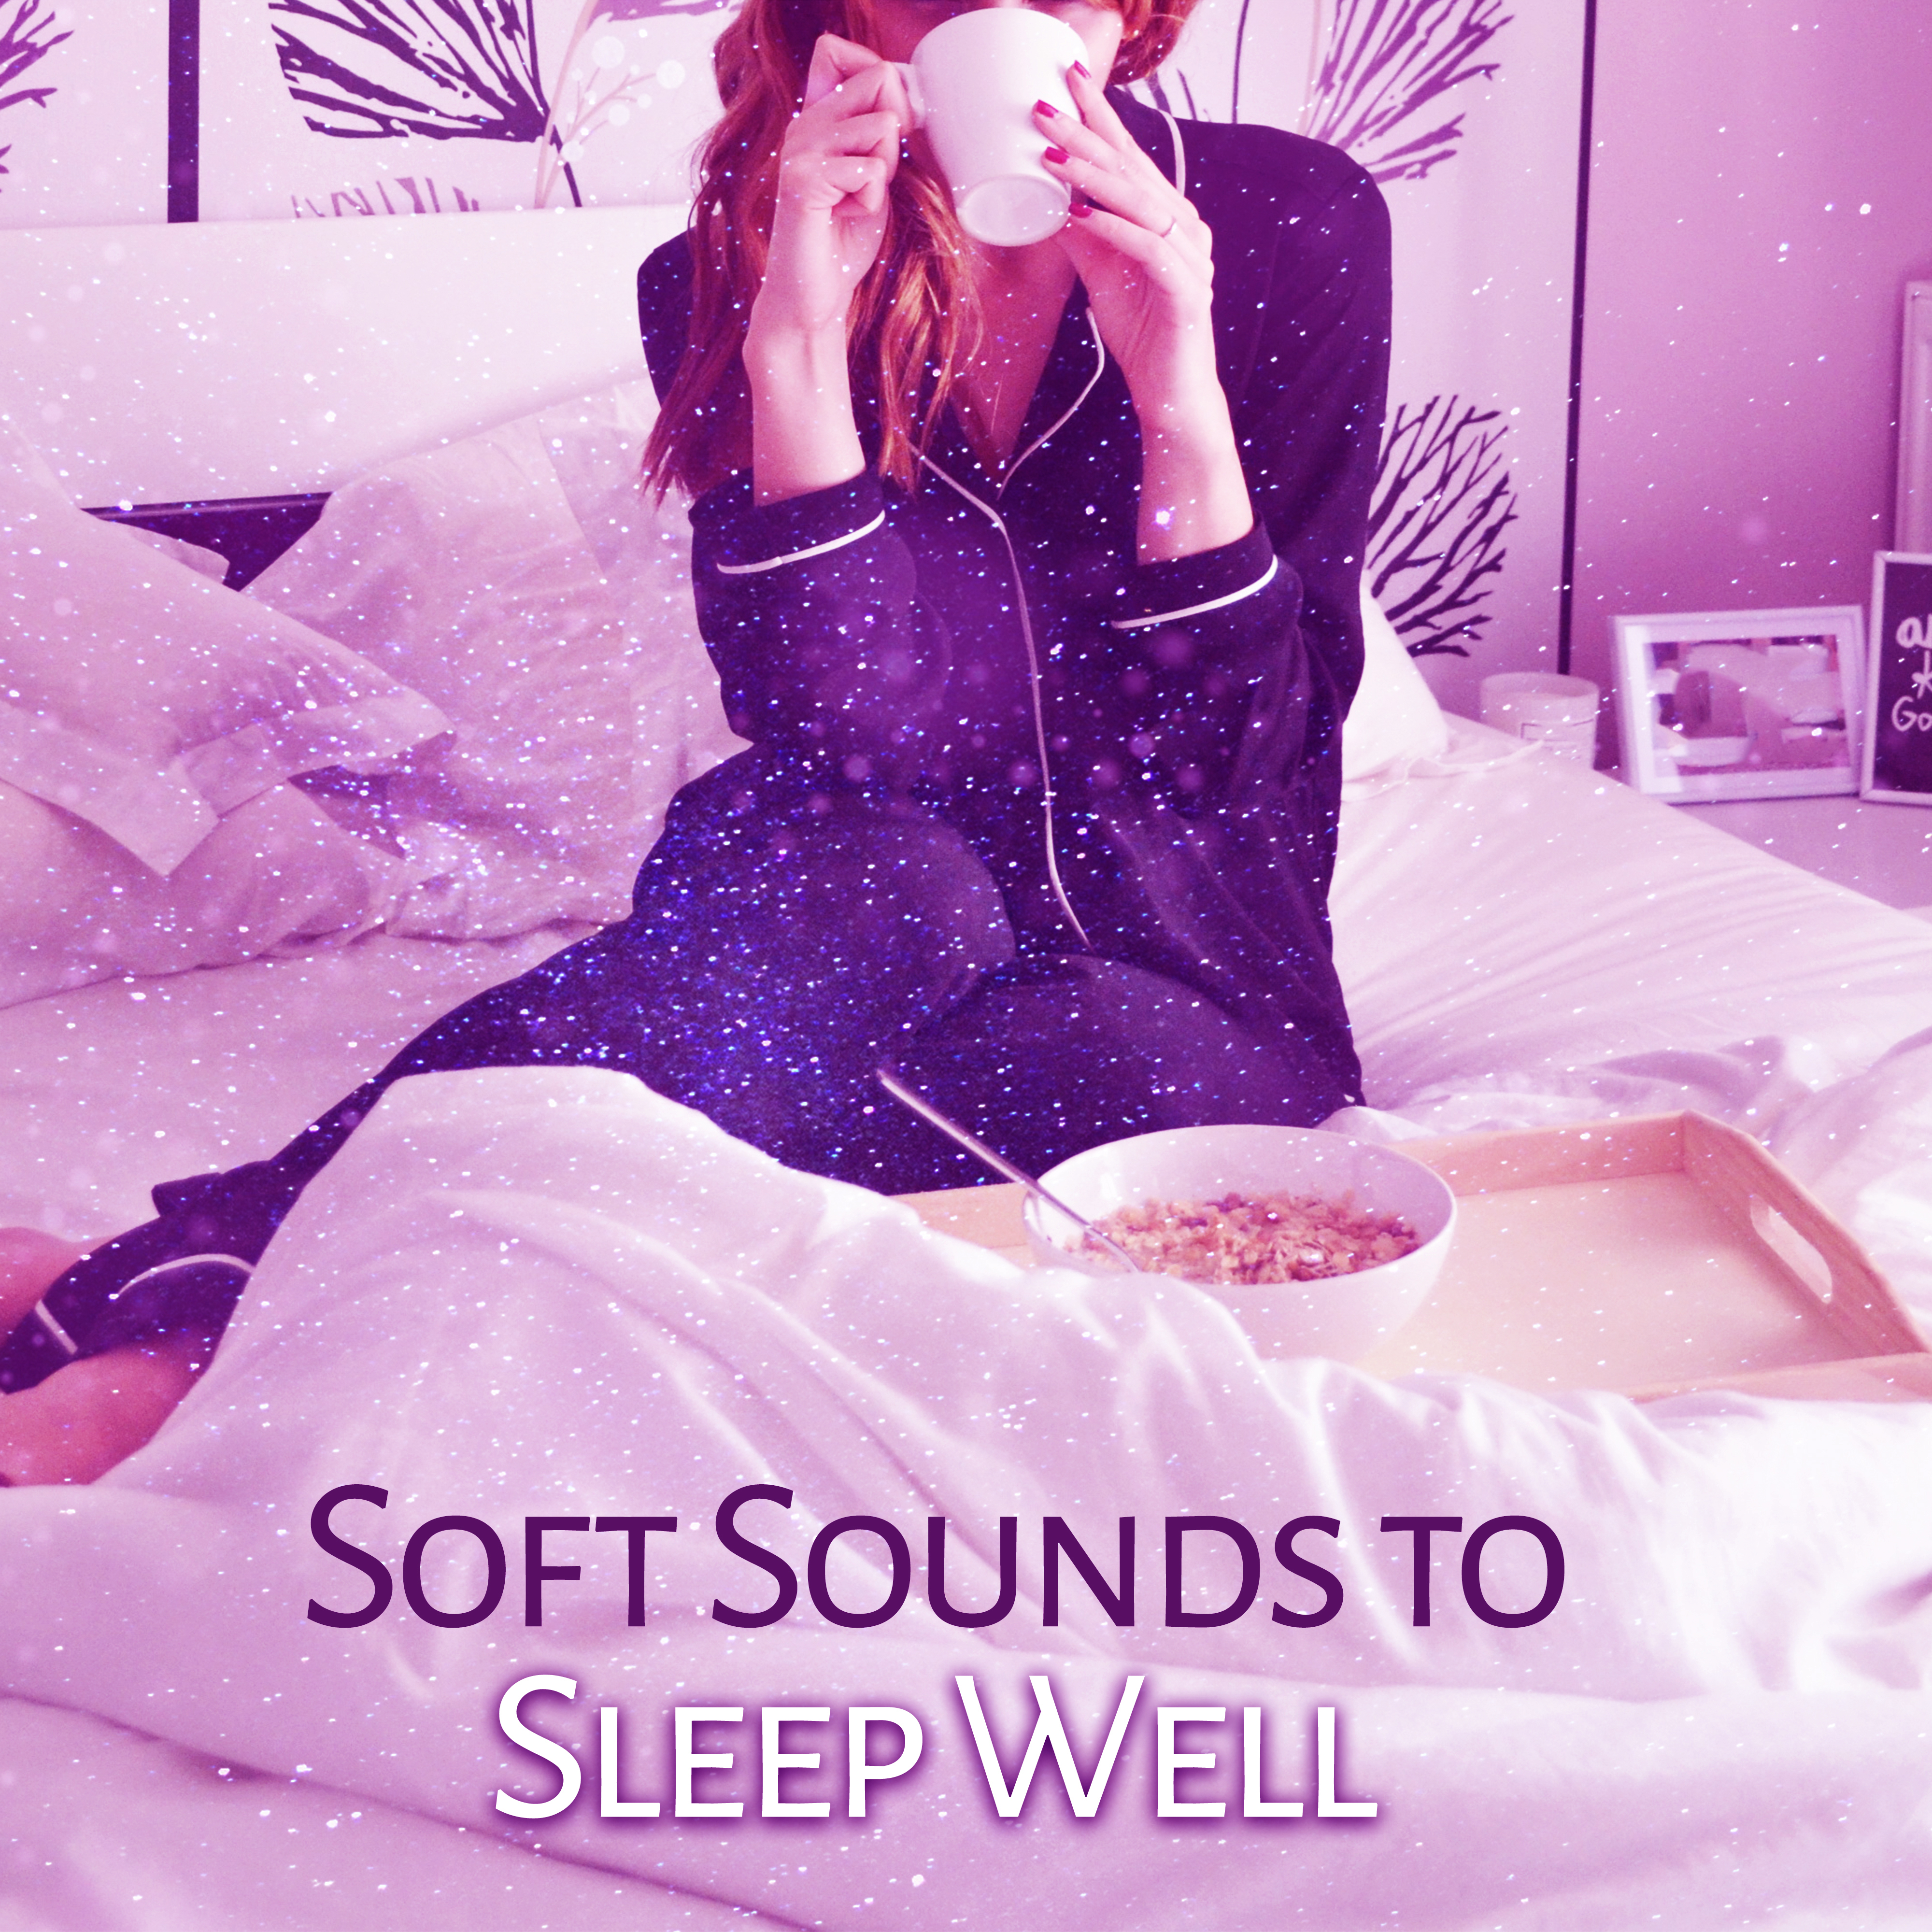 Soft Sounds to Sleep Well – Calming Sleep, Relaxing Waves, Healing Music, New Age, Stress Relief